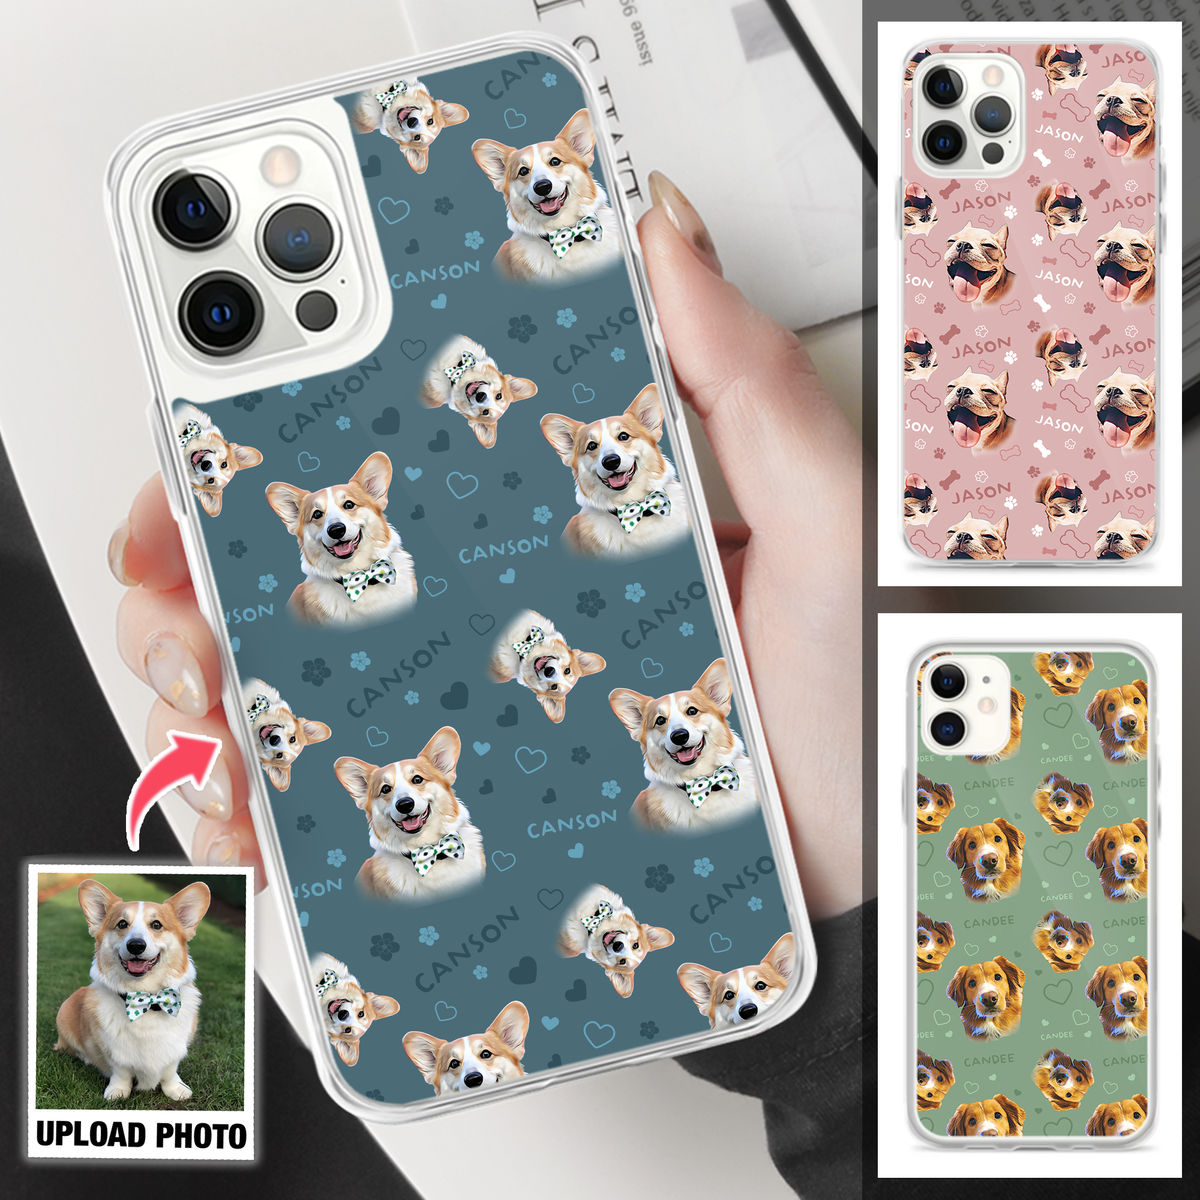 Custom Phone Case From Photo - iPhone Case - Pet Lover Gifts - Dog Portrait Pattern - Digital Oil Painting